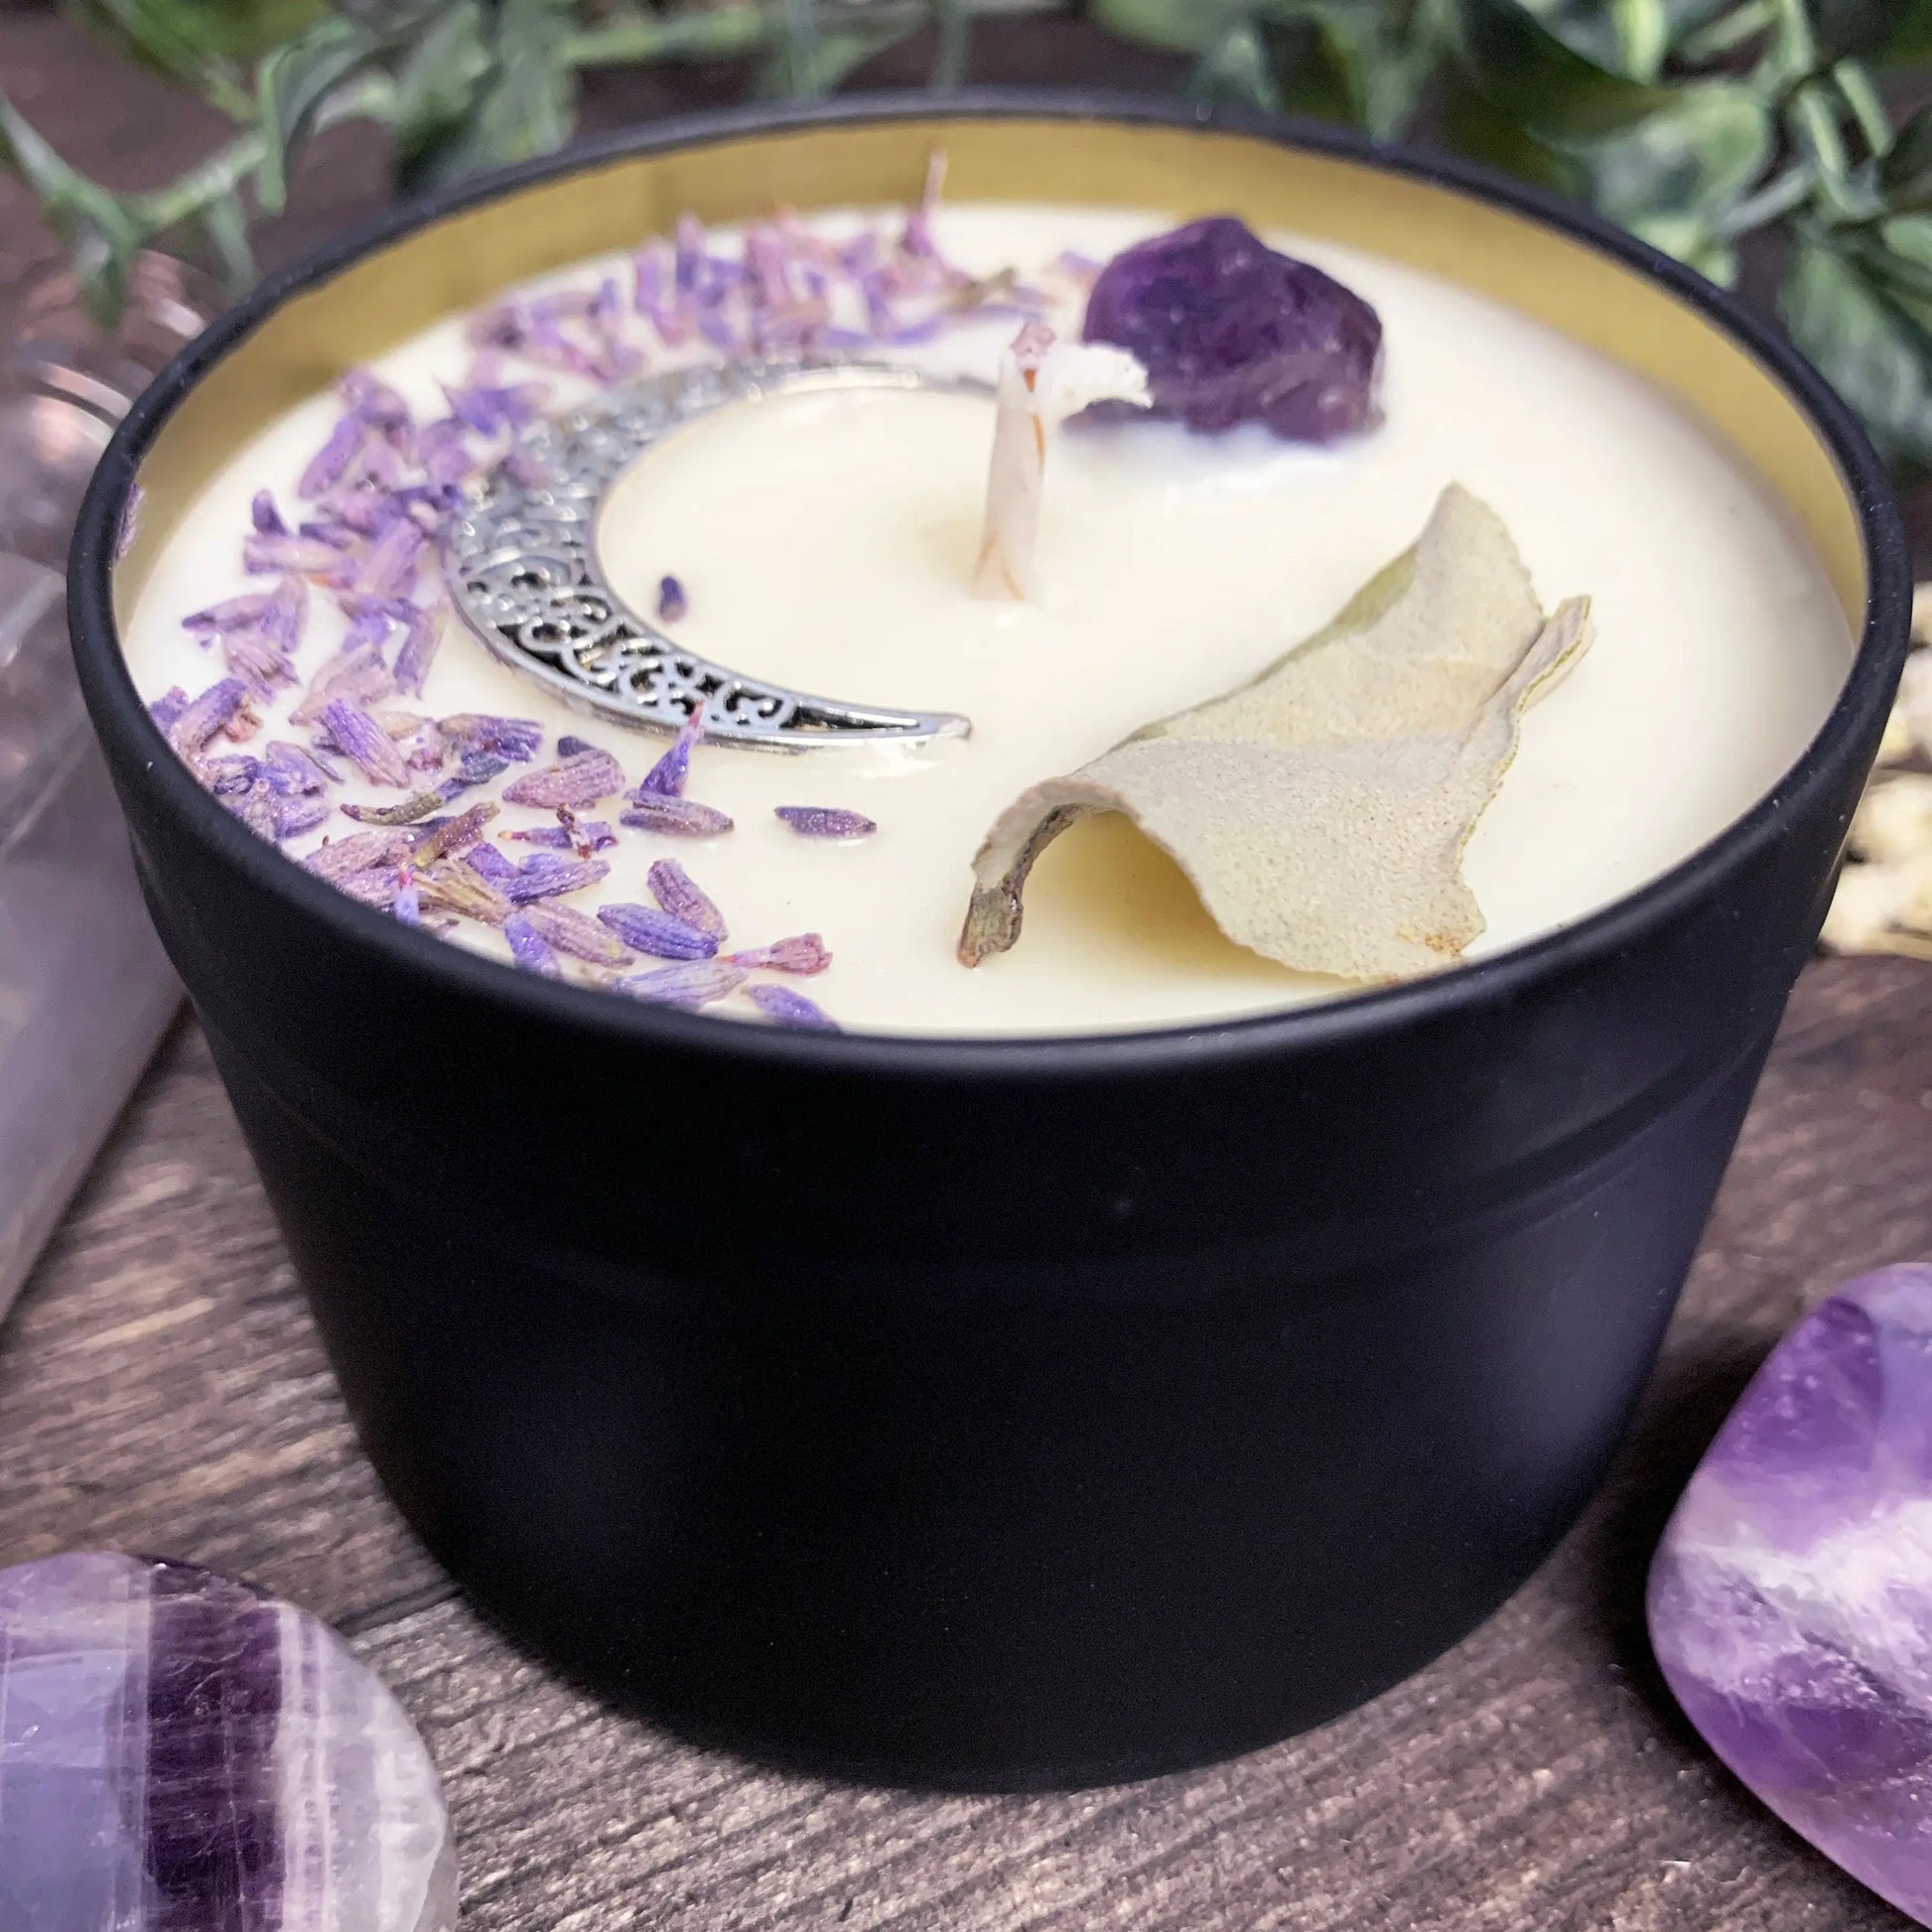 Moon Child Herb & Crystal Infused Candle | Intention Candle | Ritual Candle | Pagan Candle | Astrology Candle | Moon Magic | Soy Candle - Spellbound